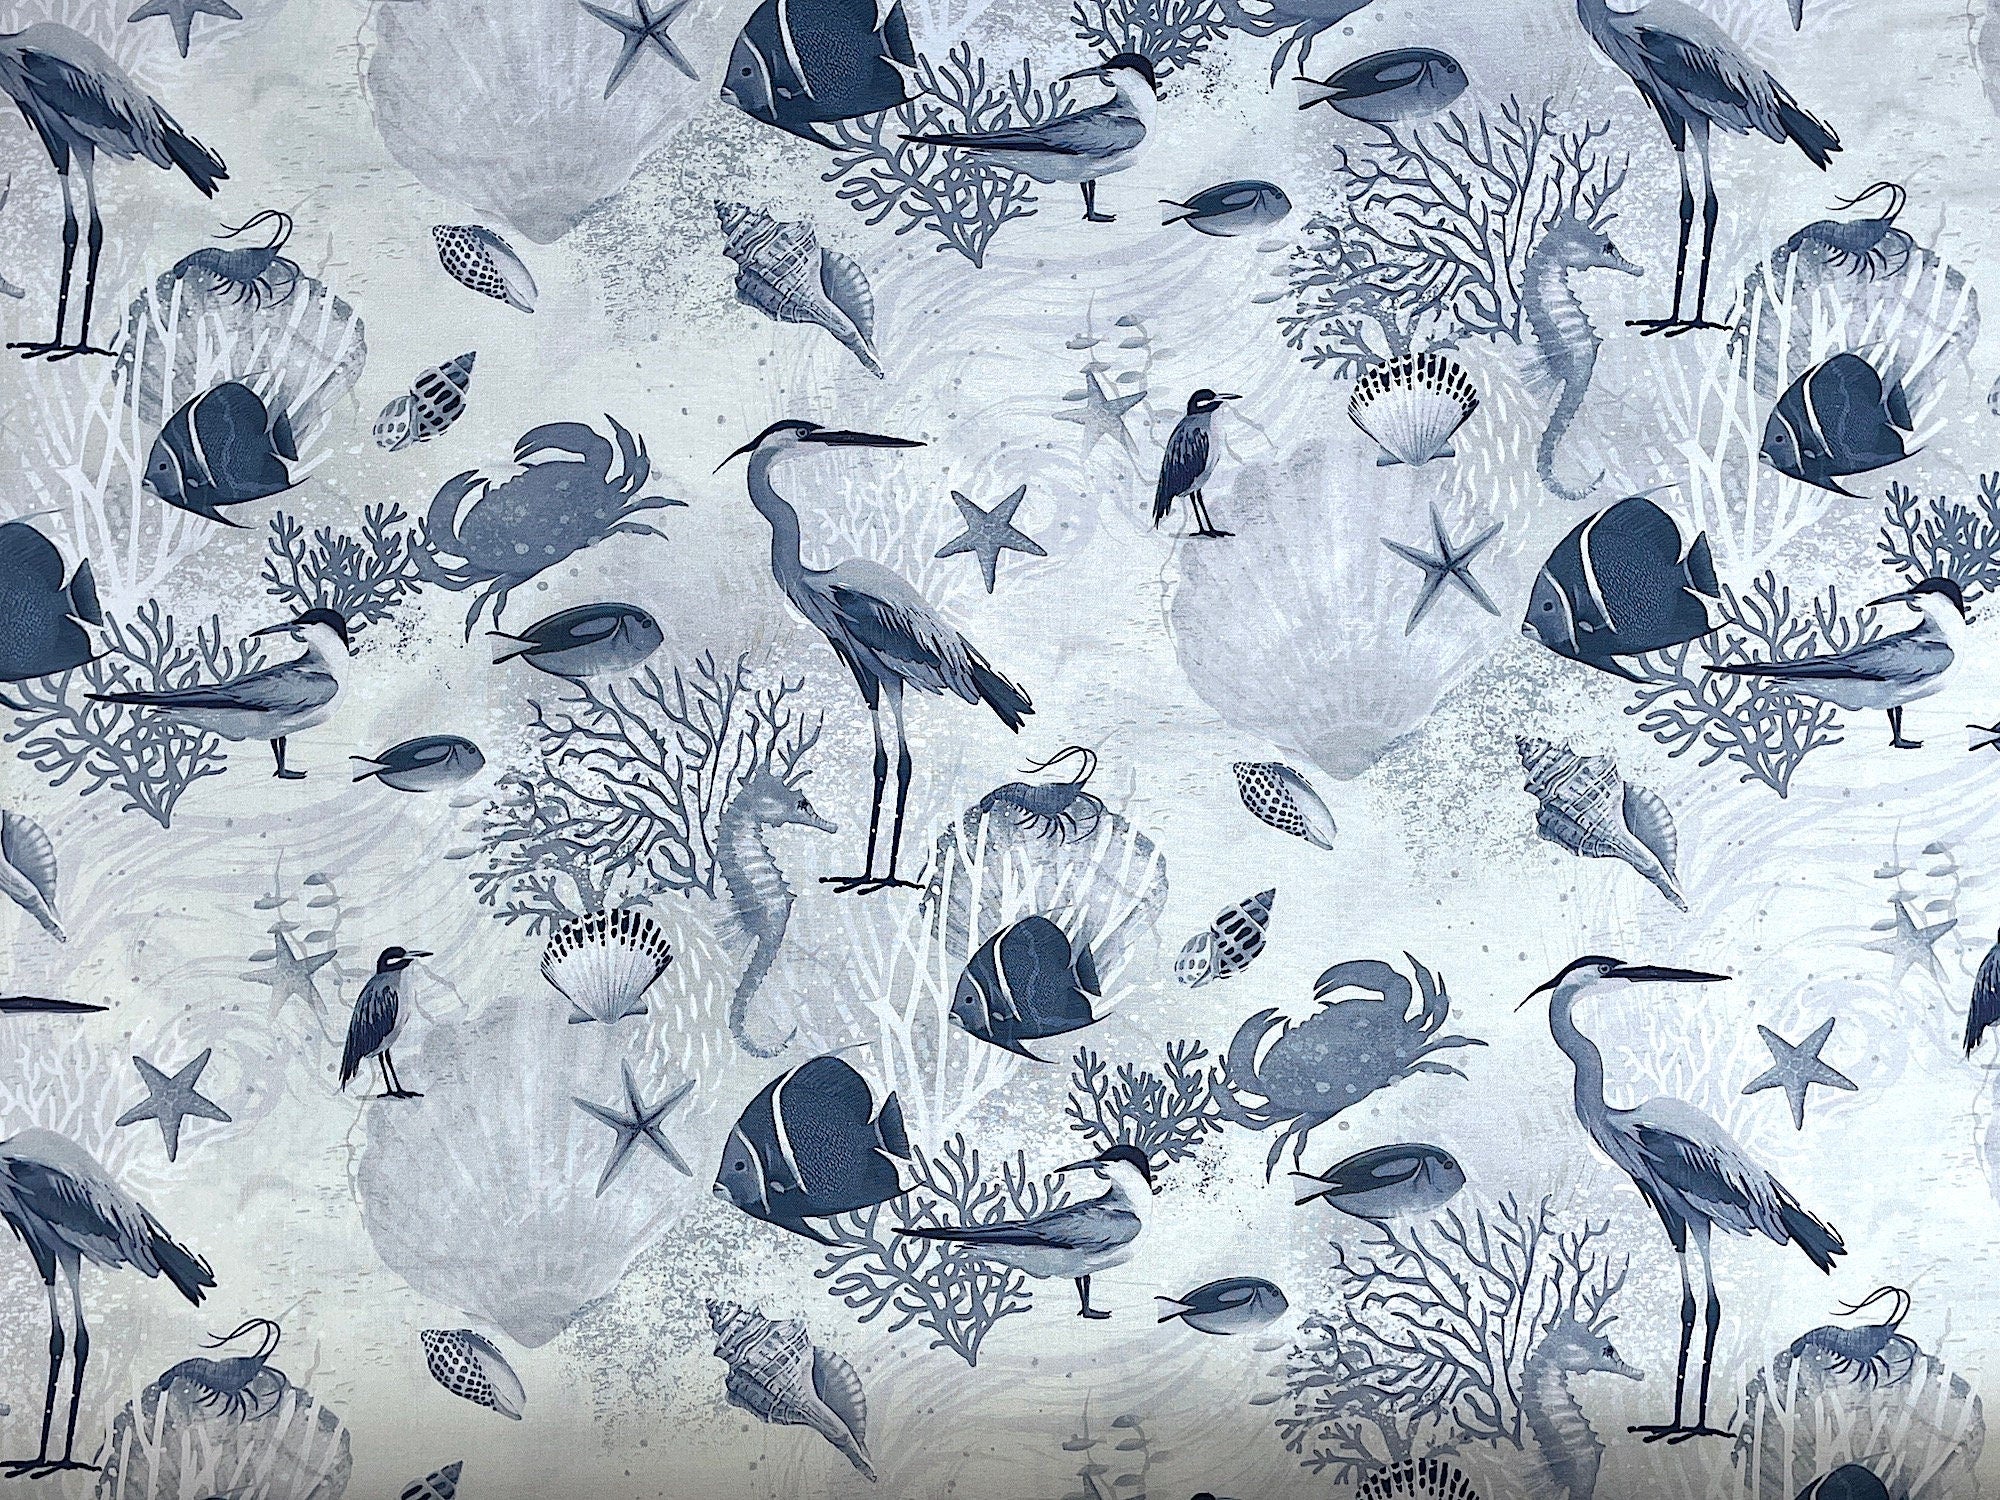 This fabric is called Sealife and is covered with blue fish, seashells, ocean plants, birds, seahorses, starfish and more. This fabric is part of the Seashell Wishes collection by Clothworks.